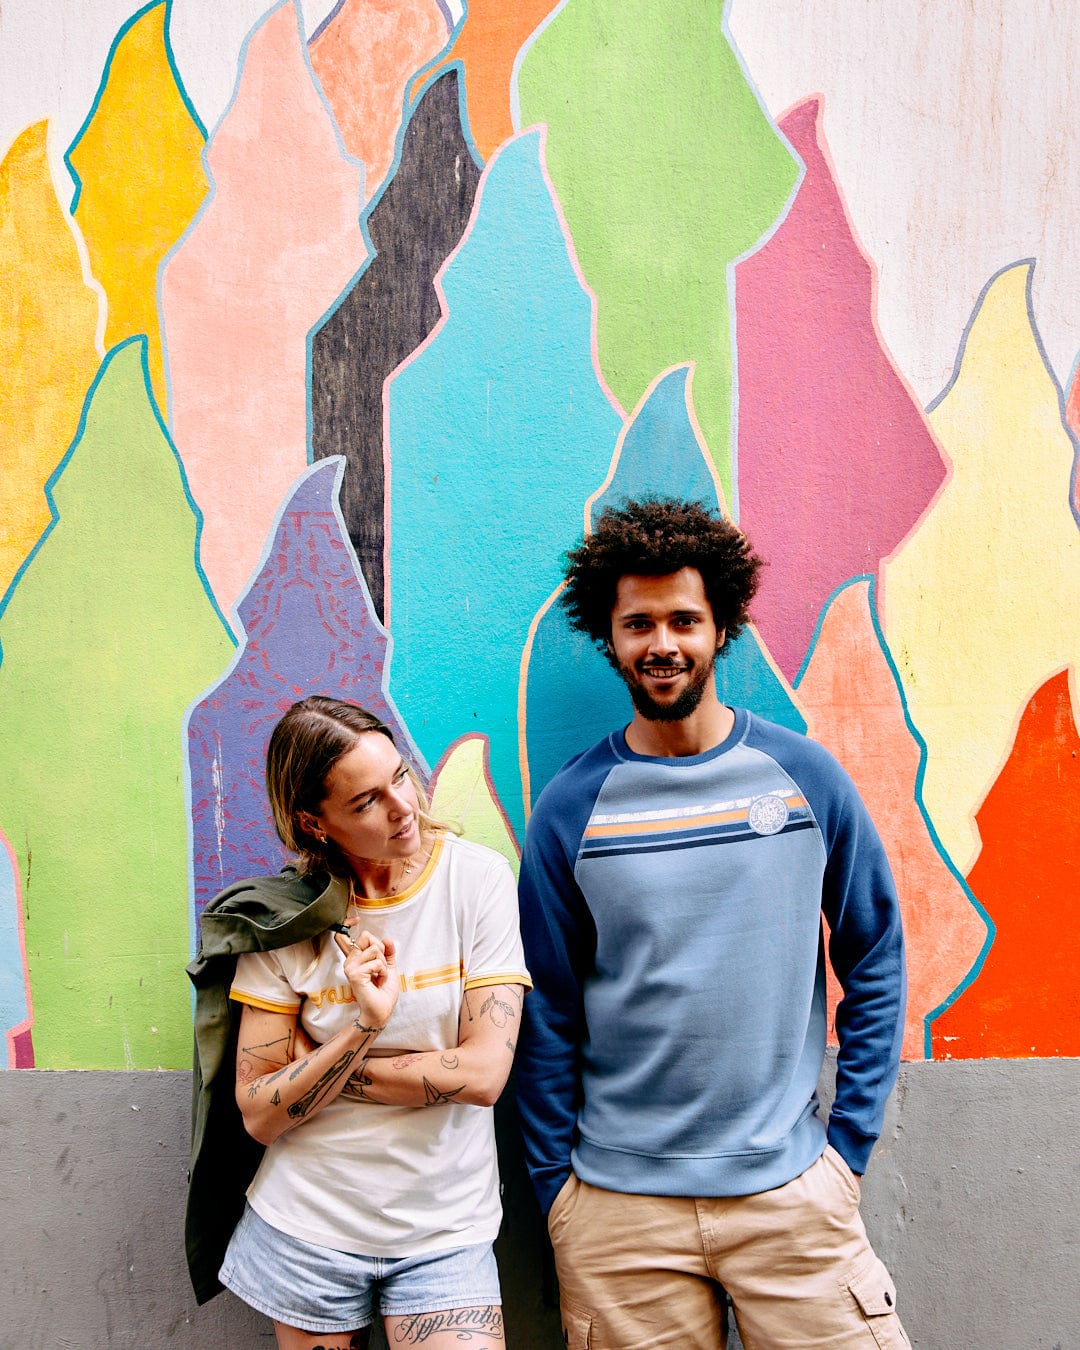 A man and a woman leaning against a colorful graffiti wall, the woman looking at the man who is smiling at the camera, both wearing Saltrock Spray Stripe - Recycled Mens Sweat - Blue shirts with a crew neckline.